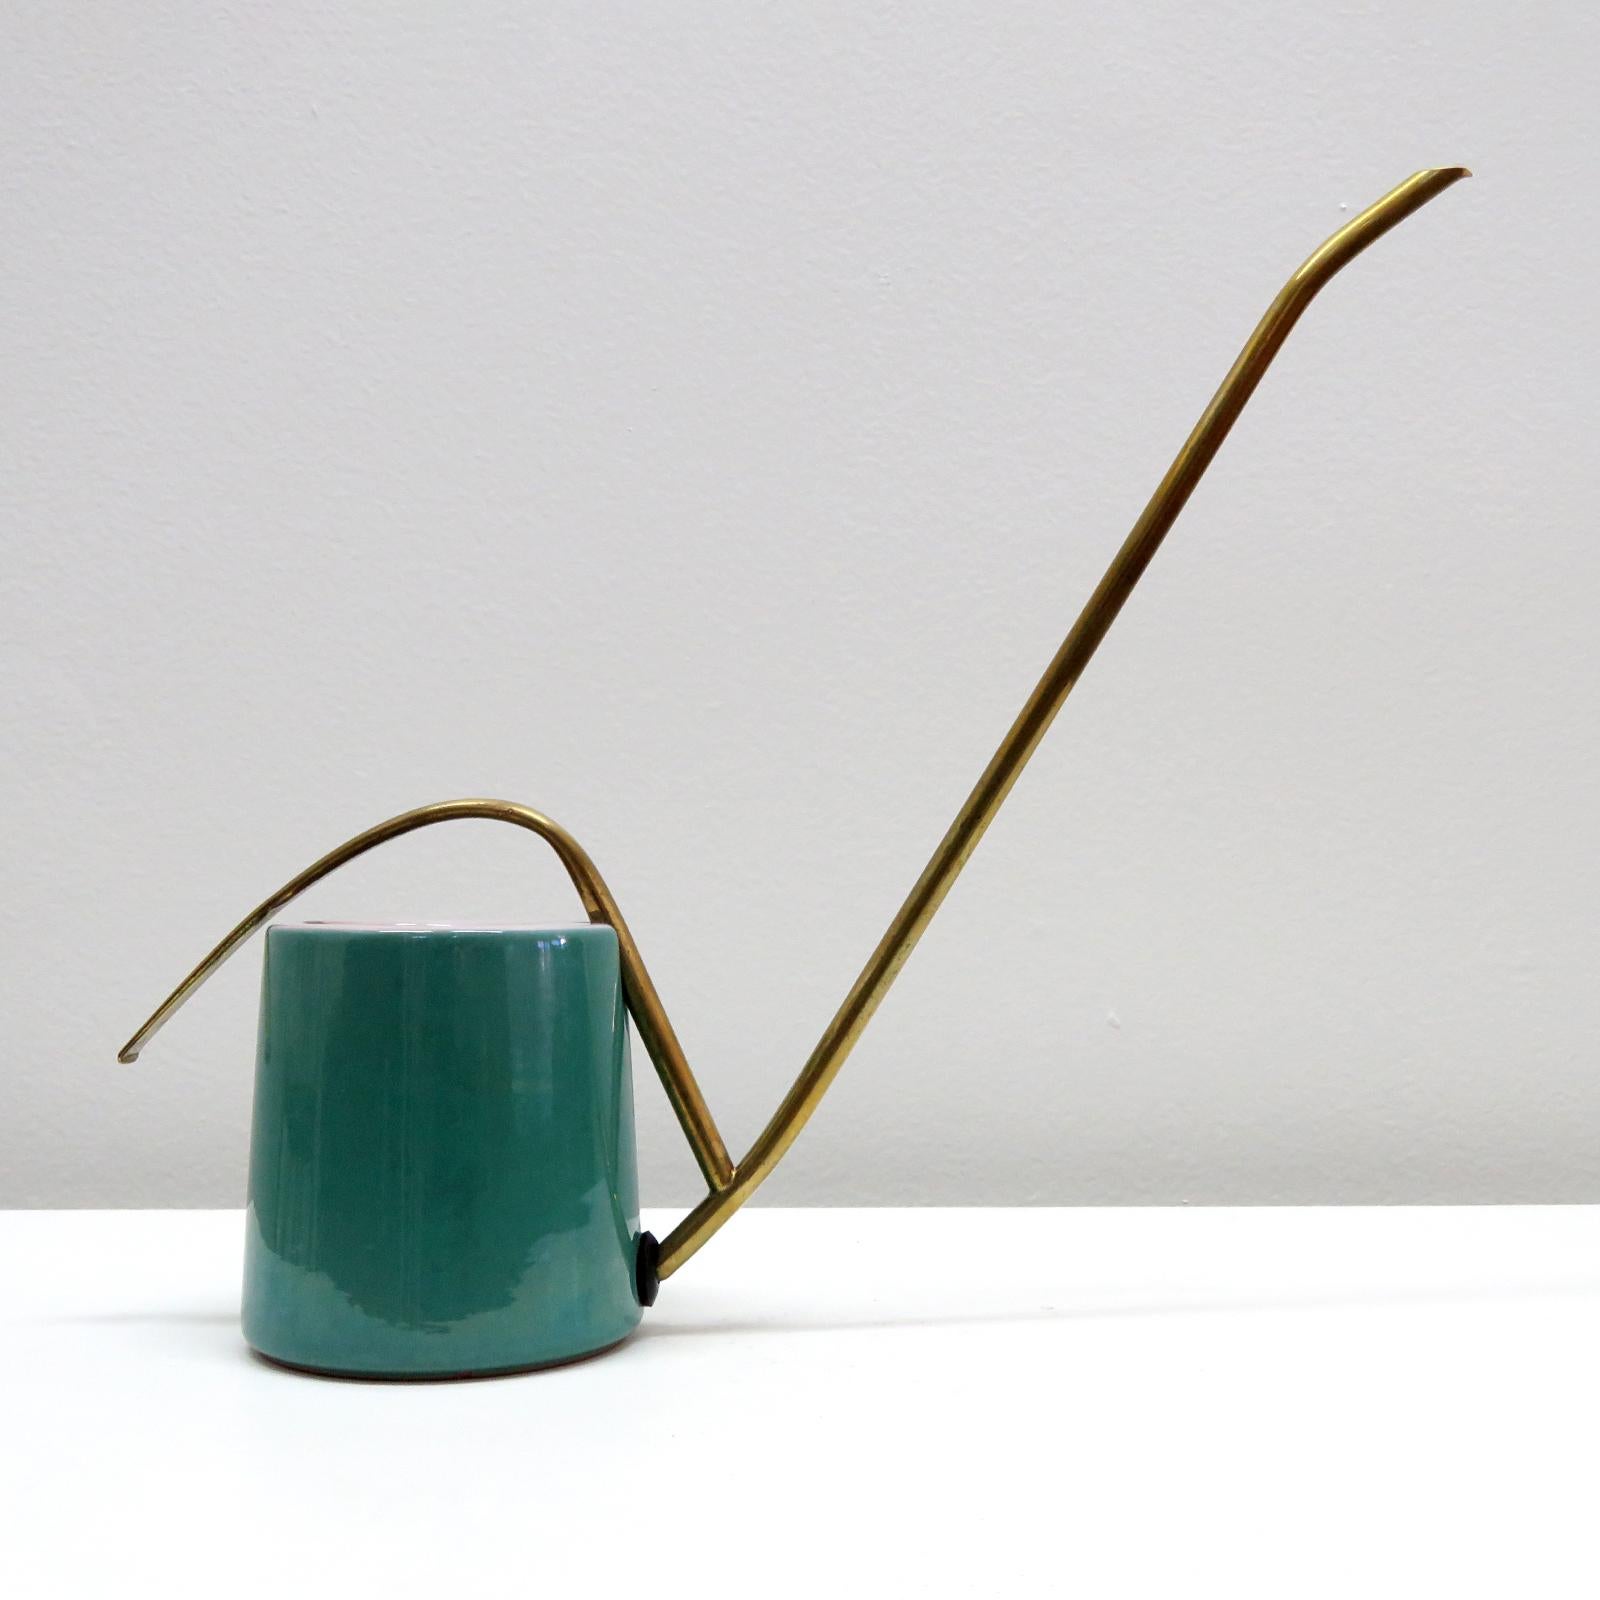 Sculptural German cactus watering can by Fritz Dienes for Hessische Majolika, Germany, 1953, with dual color glazed ceramic body and sculptural brass handle and spout, great lines, great original condition, marked.